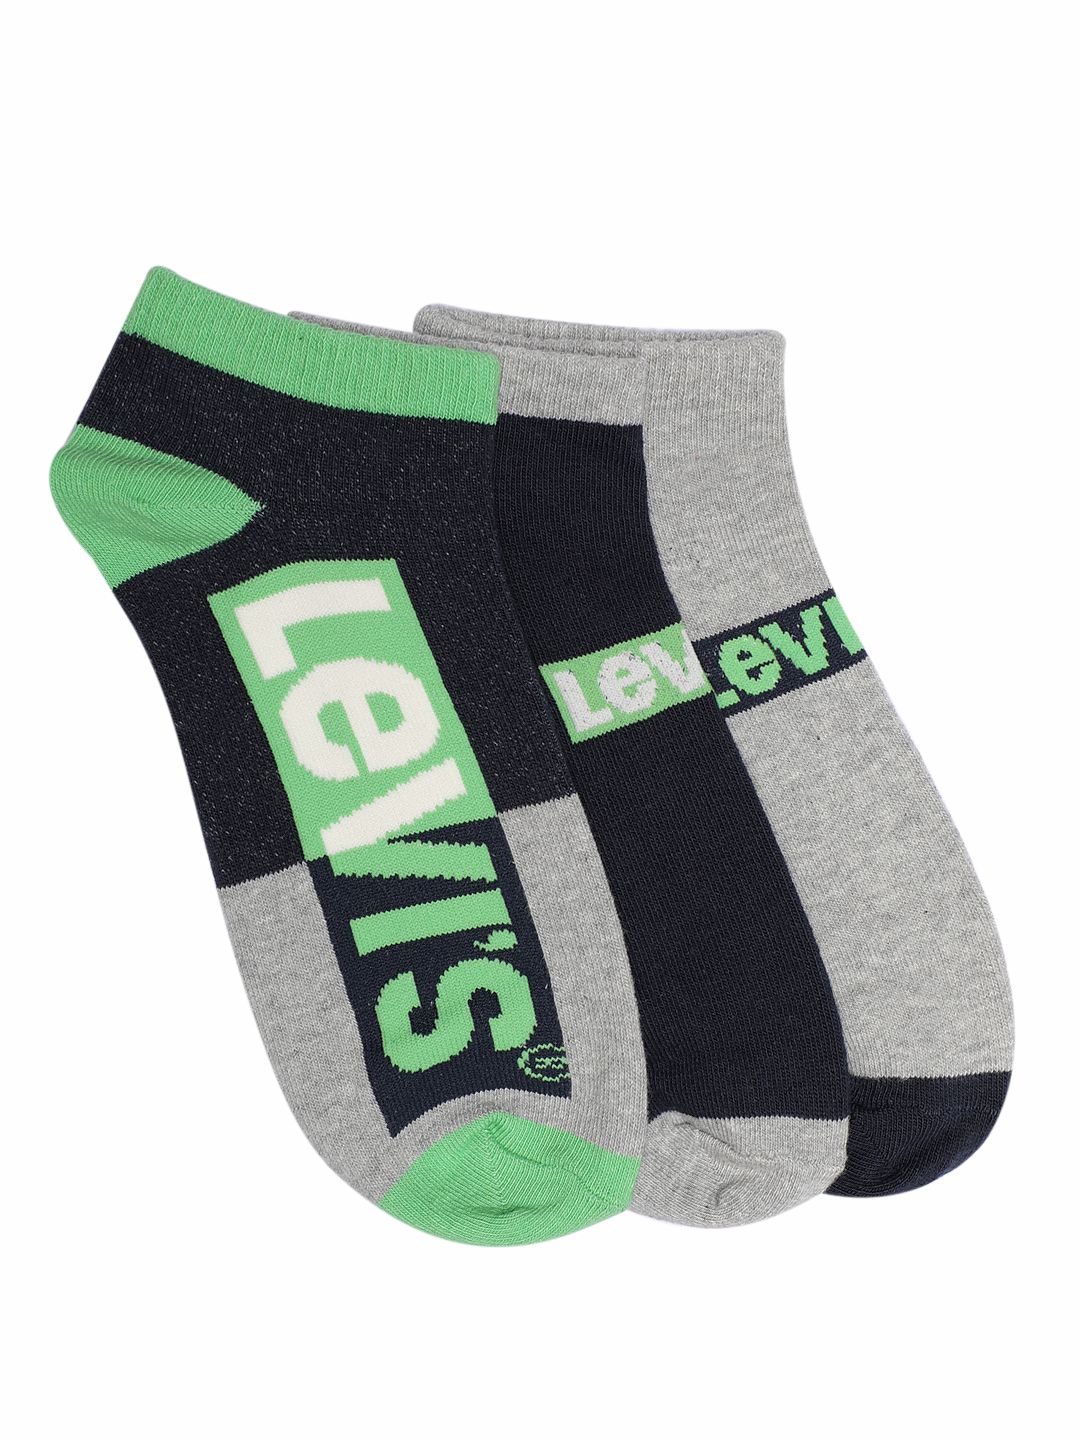 Levis Multi Ankle Length Socks Pack of 3: Buy Online at Low Price in India  - Snapdeal